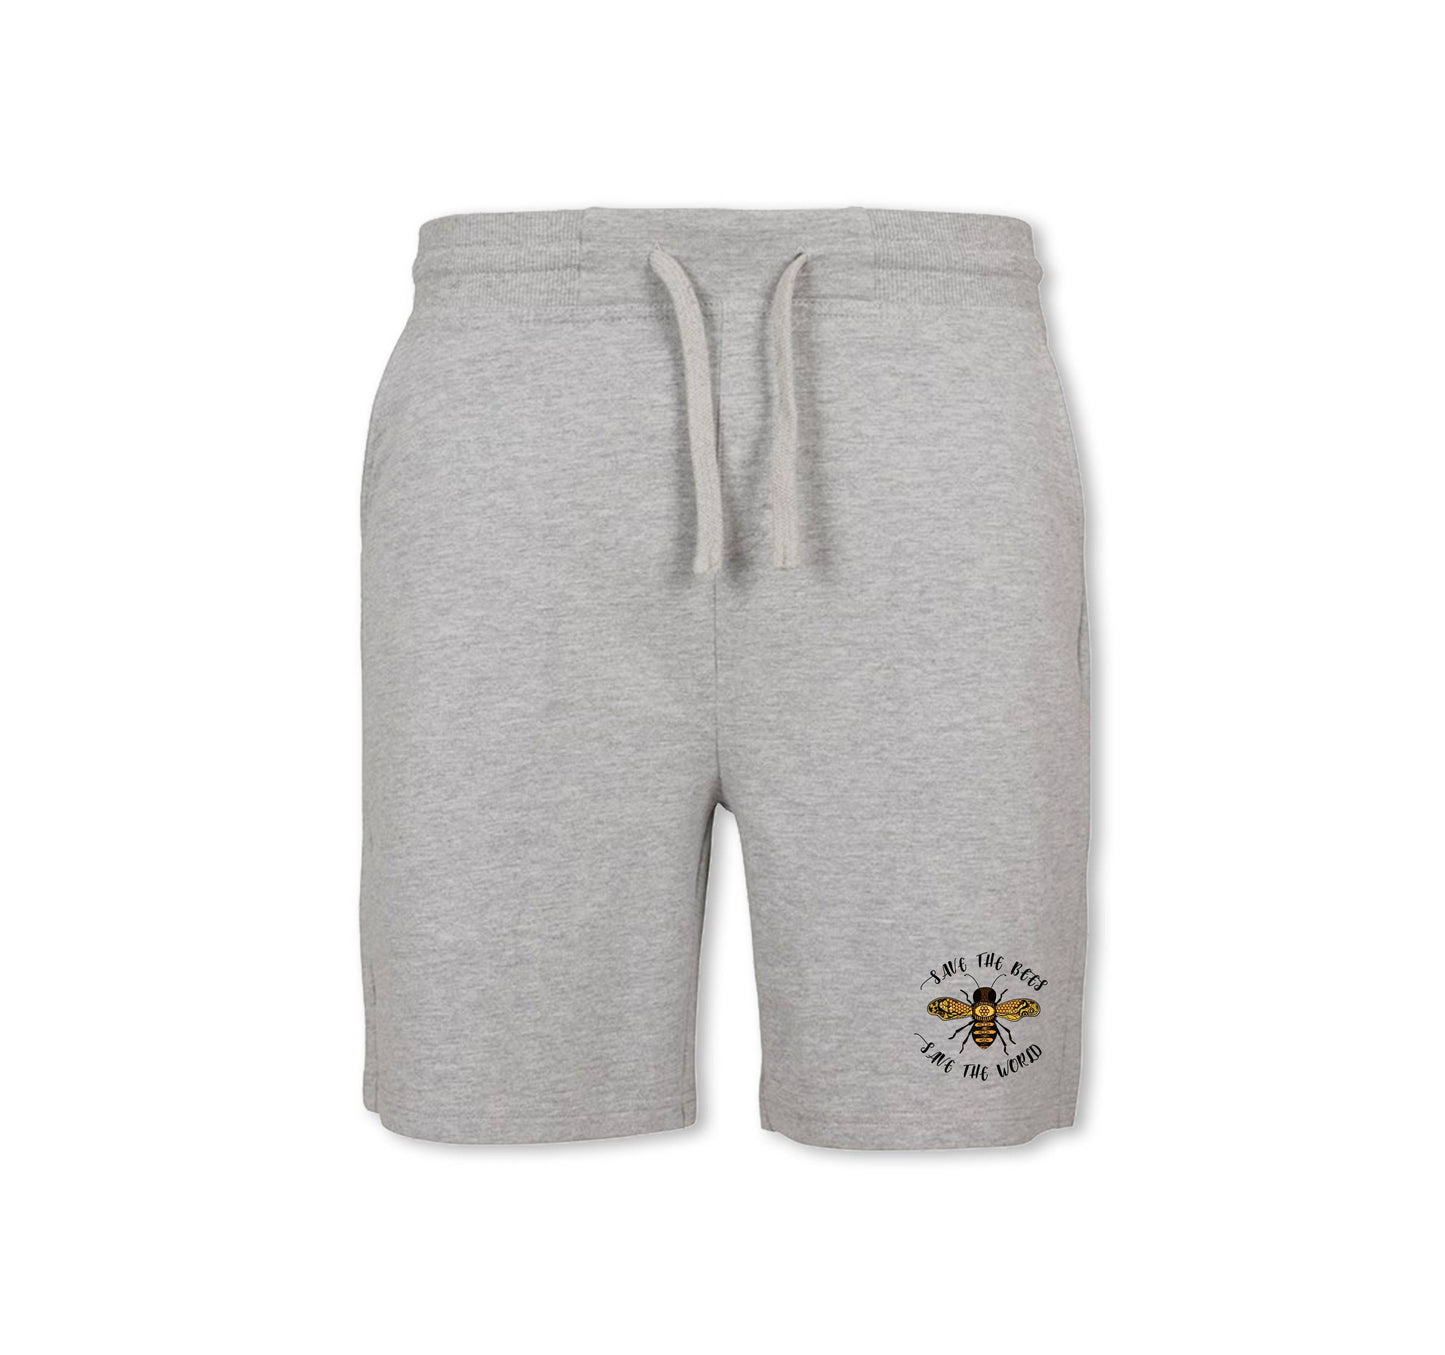 Save The Bees Shorts - Organic Cotton - One Choice Apparel